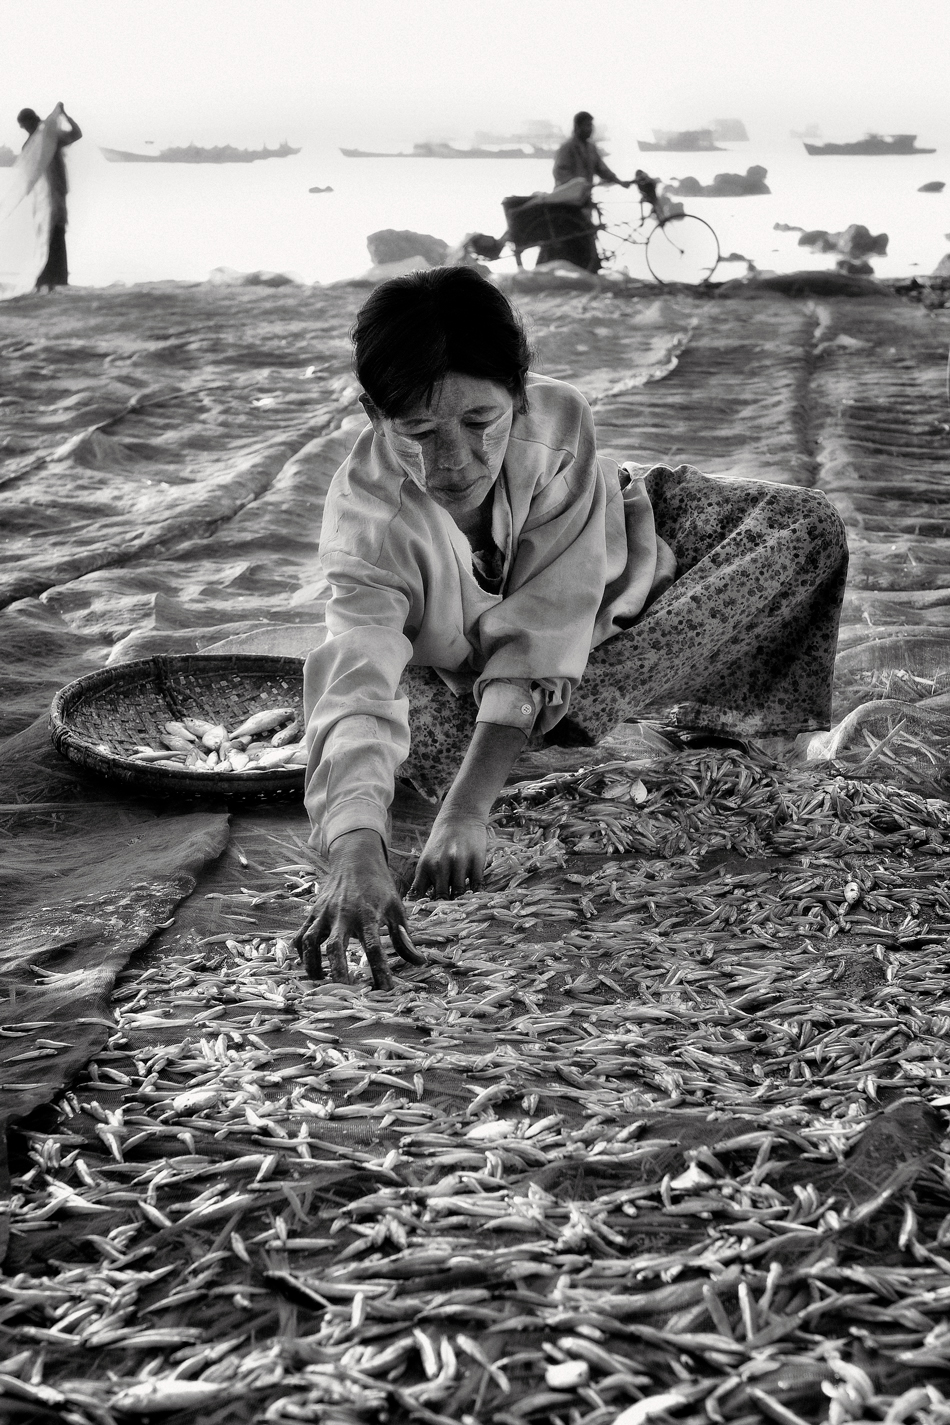 a woman sitting on the ground with a basket full of fish